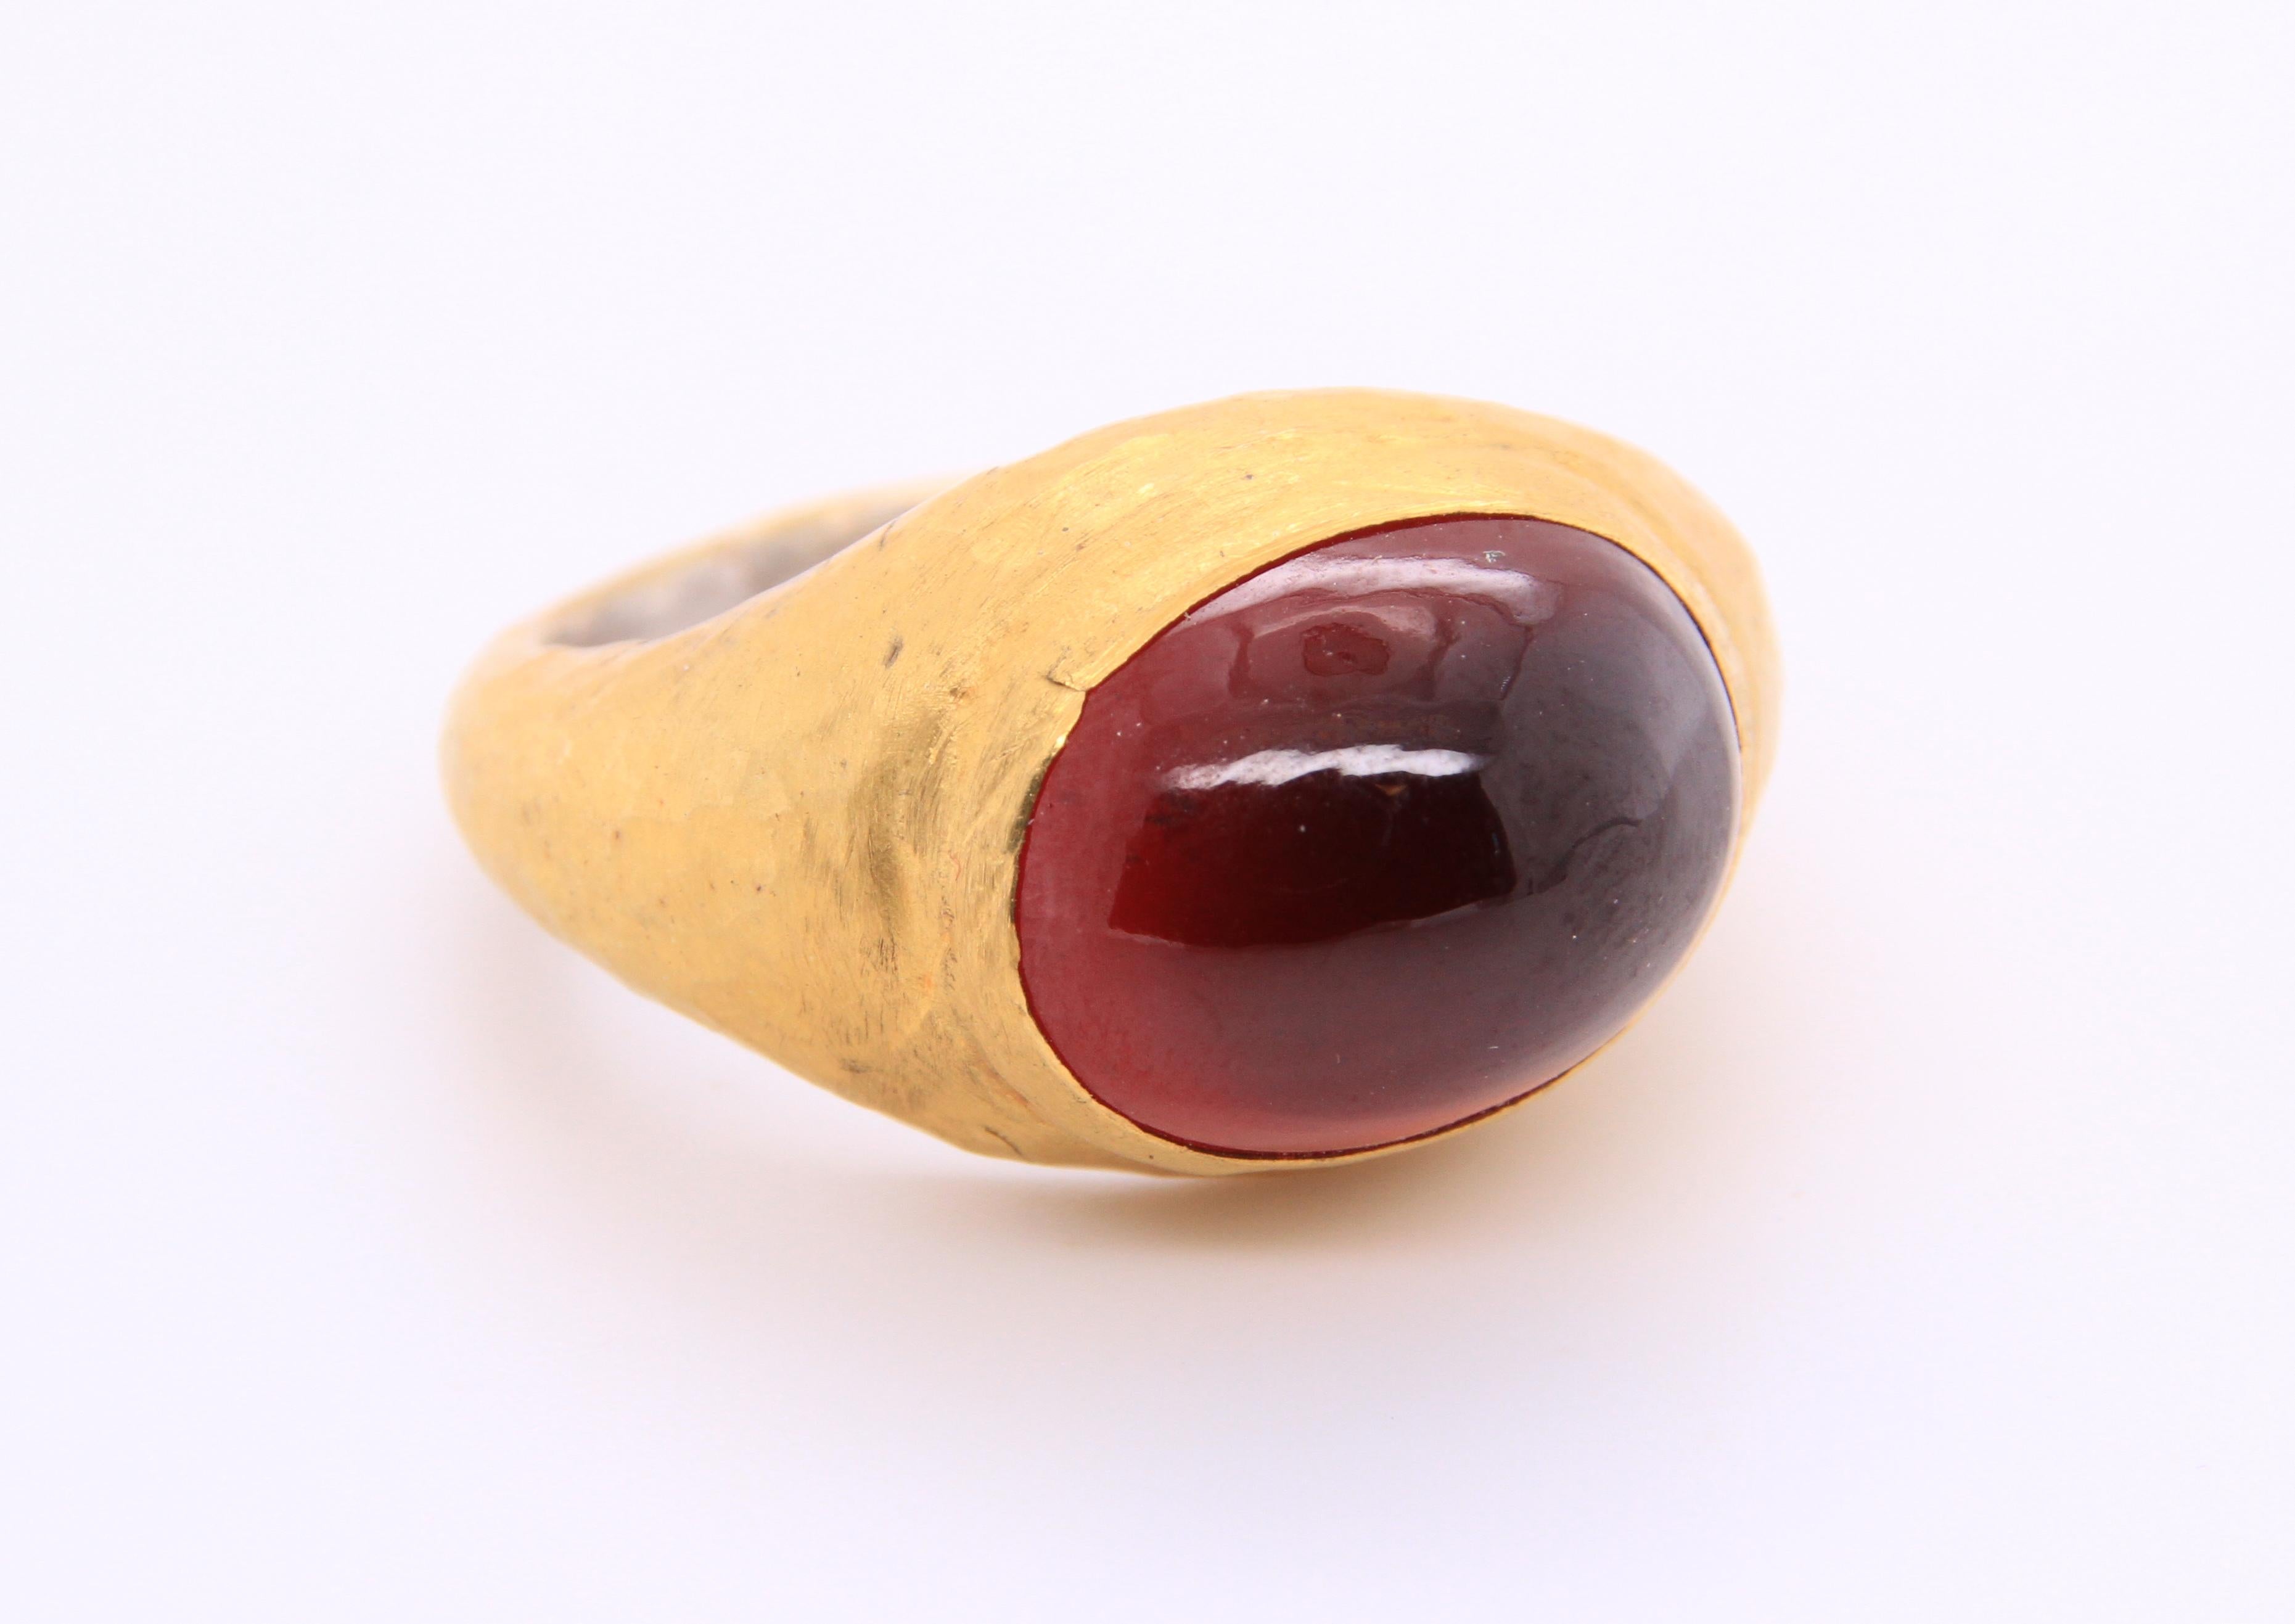 Large, Oval, Smooth Garnet Cabochon, Vintage-looking Ring with 24K Gold and Silver, Size 7 1/2, Unisex Ring, Handmade by Prehistoric Works of Istanbul Turkey
Ring Details: 24K Y Gold - 2.70 grams
Sterling Silver S925 - 6.20 grams
GARNET - 12.50